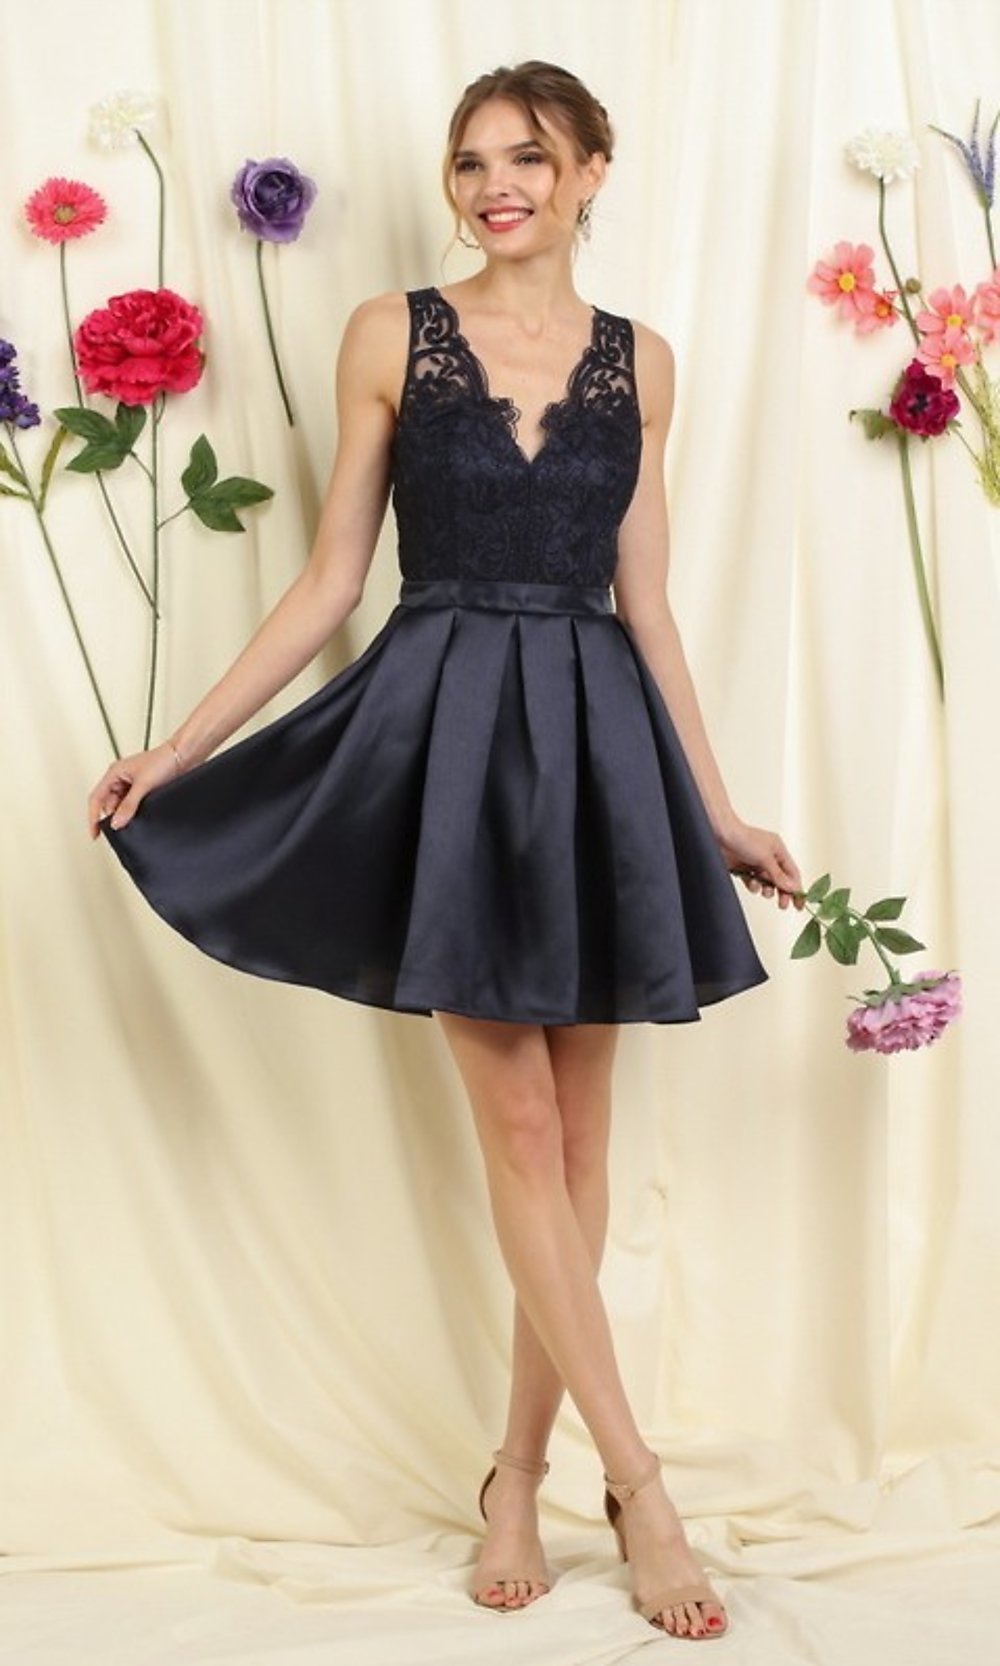 Lace Bodice A-Line Short Homecoming Dance Dress